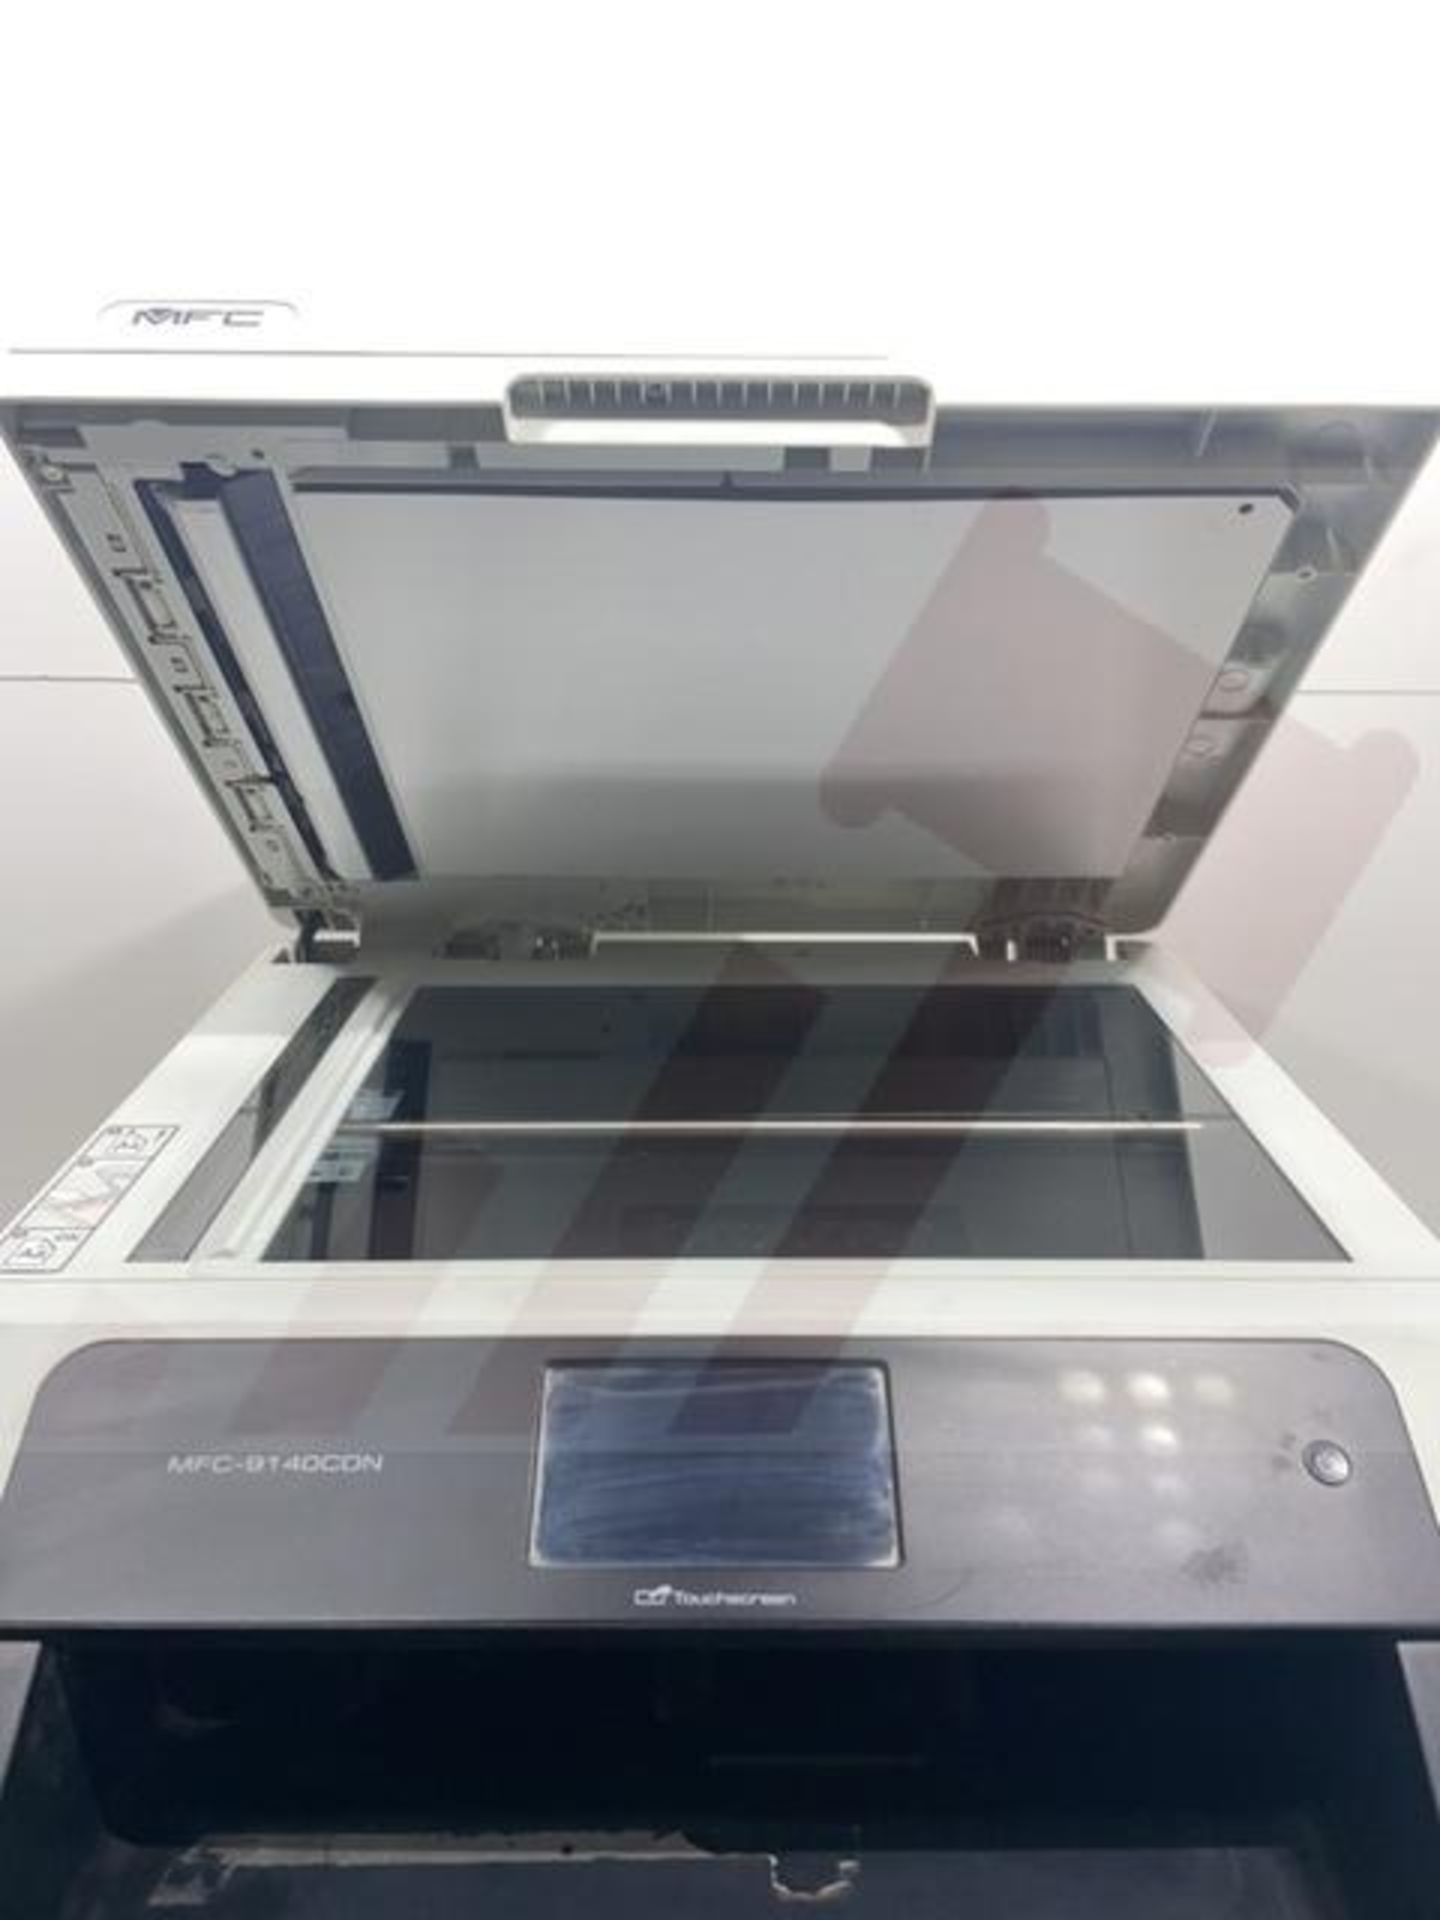 Printer, Brother MFC-9140CDN | See Pictures - Image 3 of 5